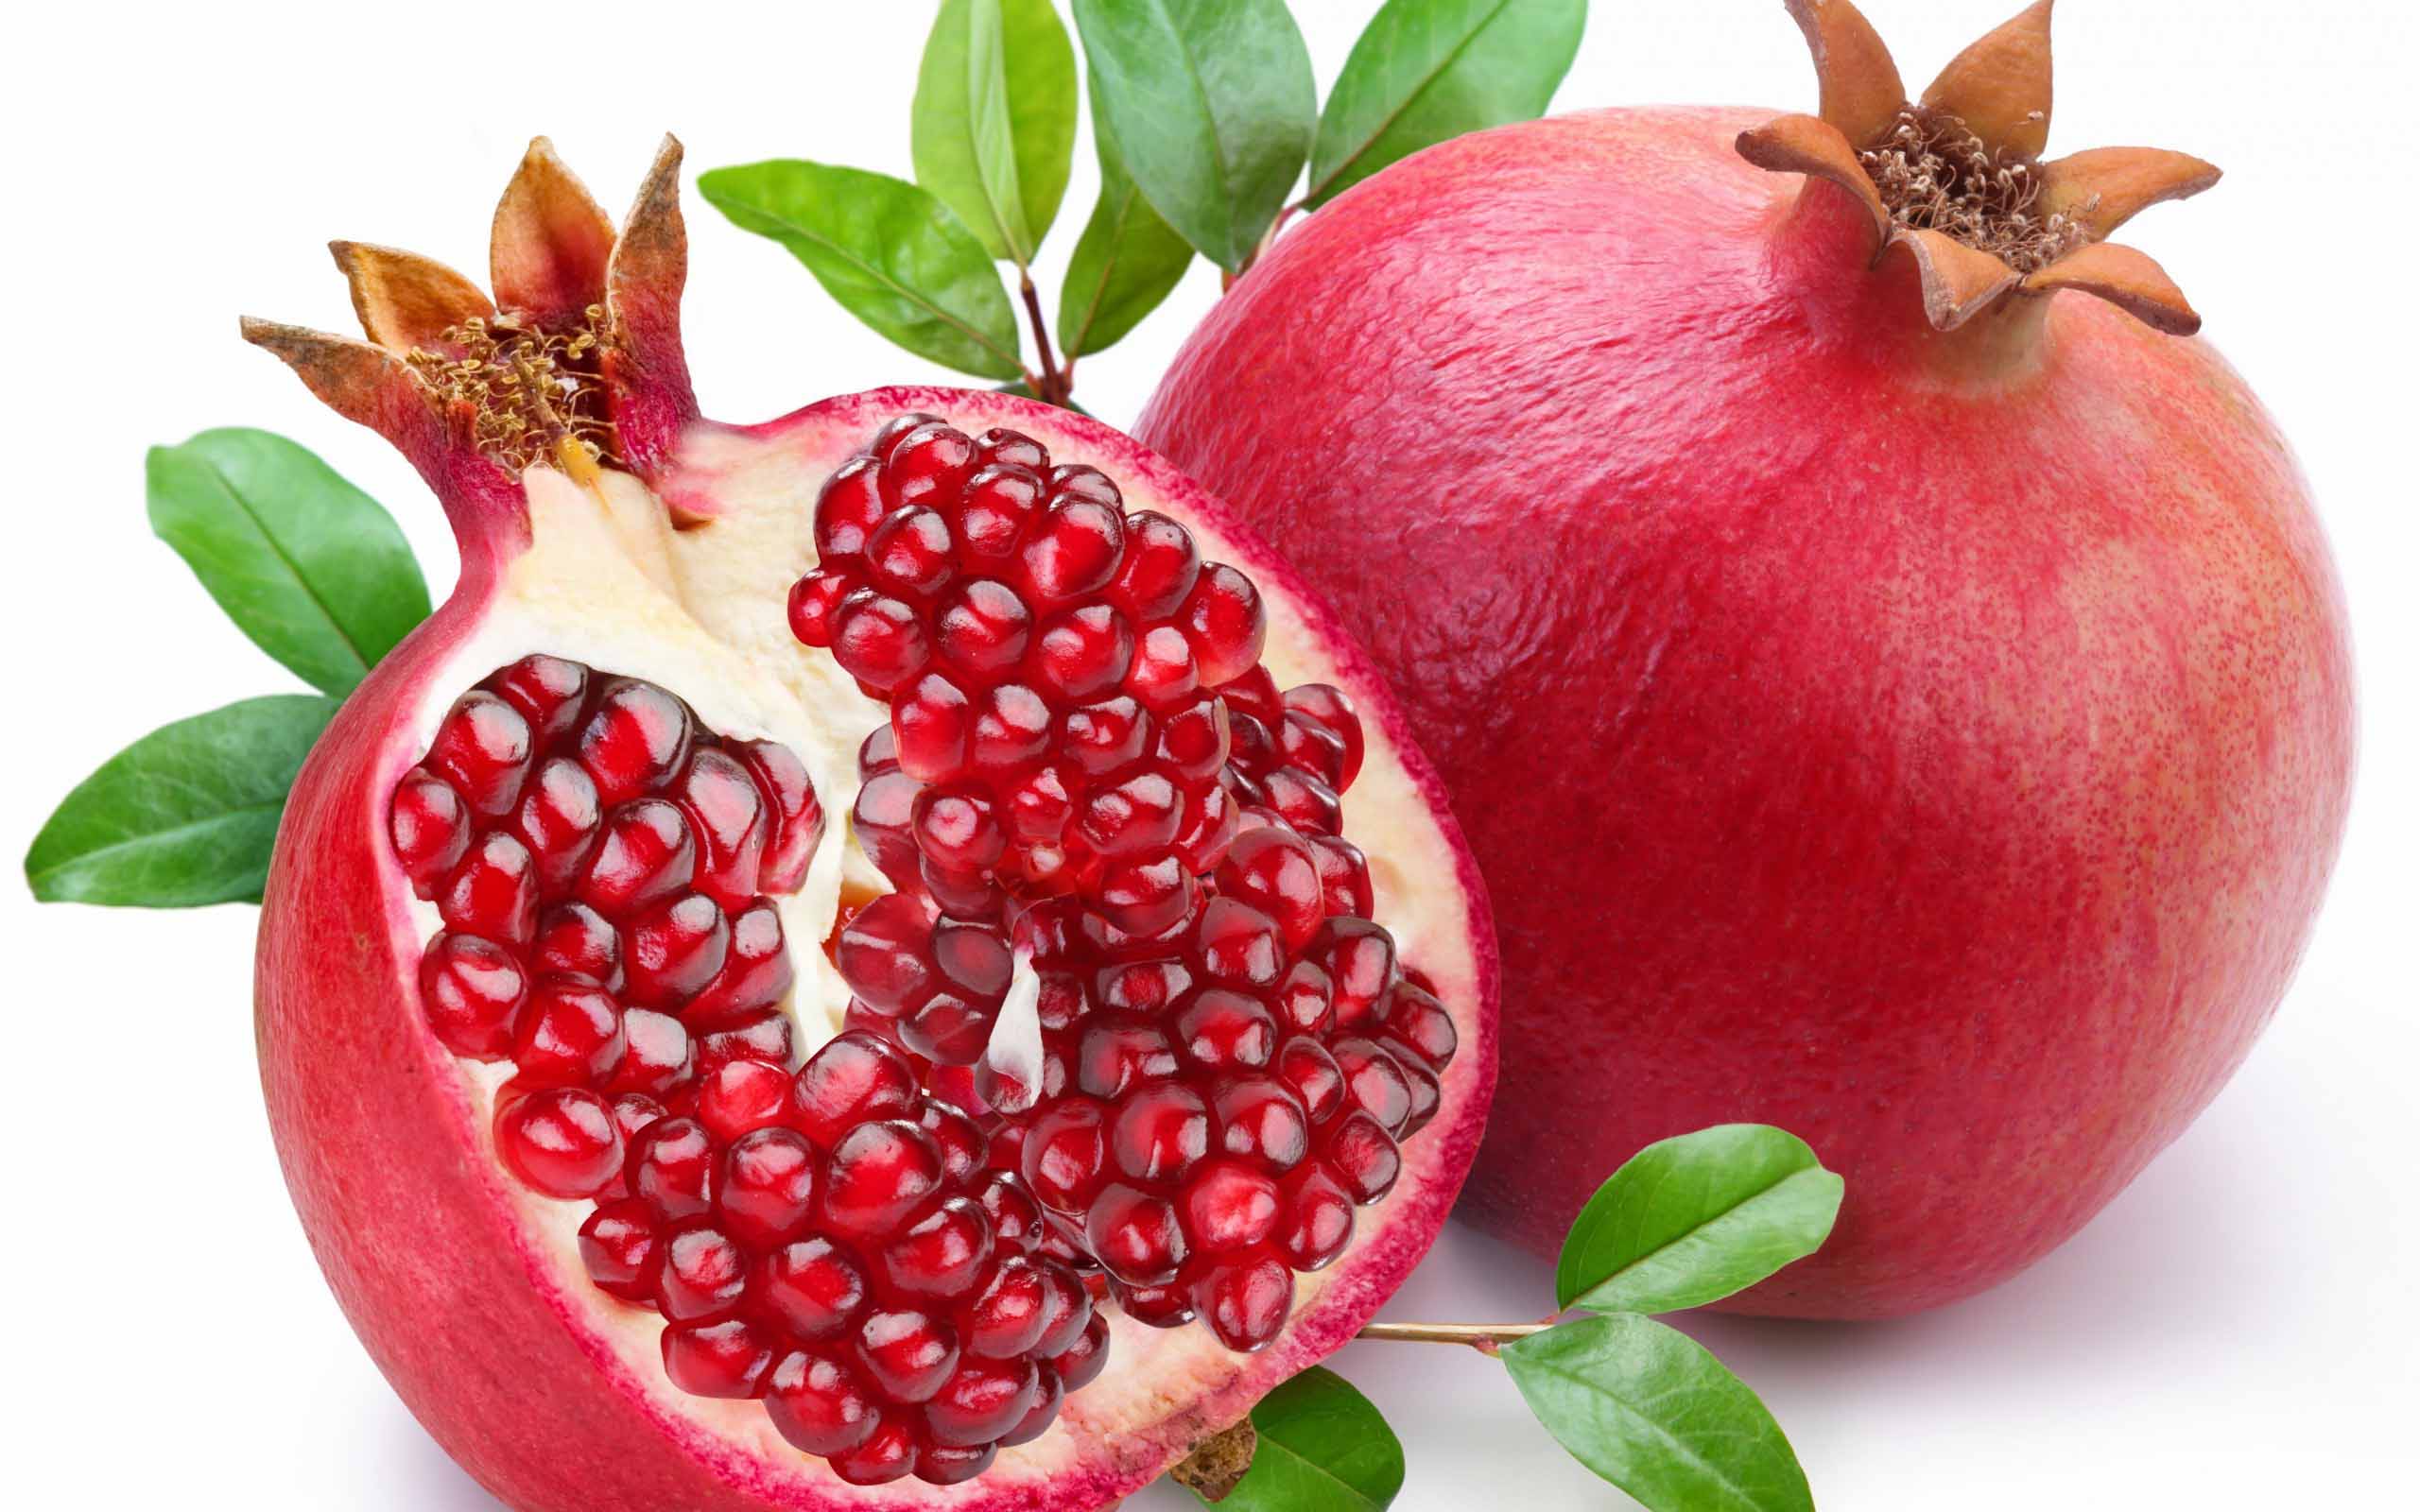 Pomegranate Pictures